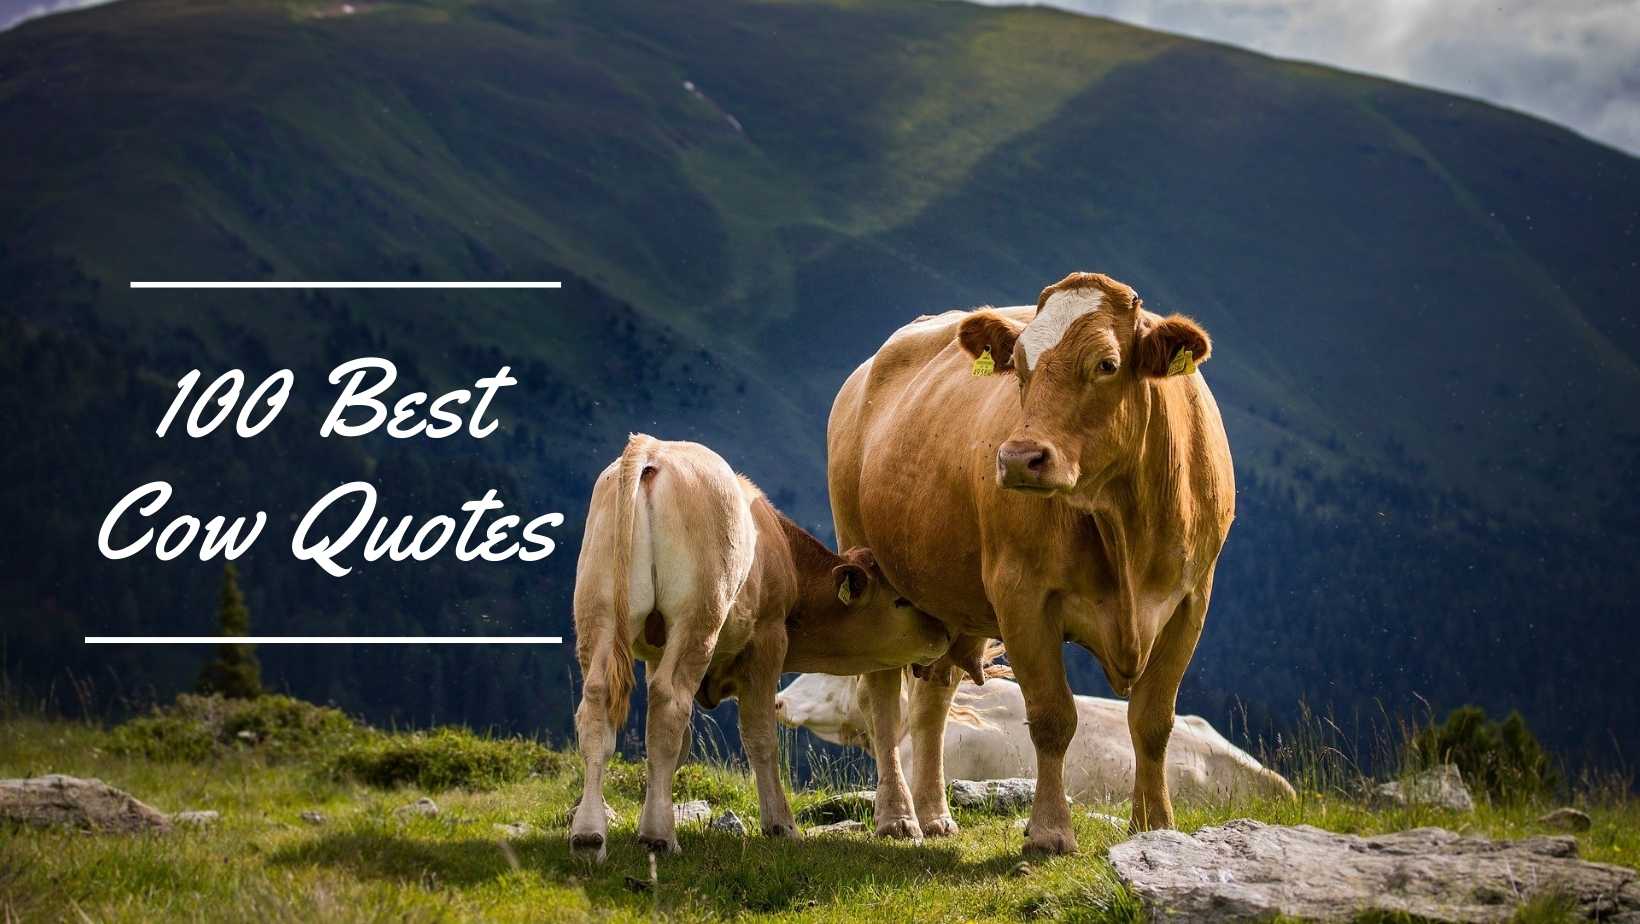 100 Best Cow Quotes